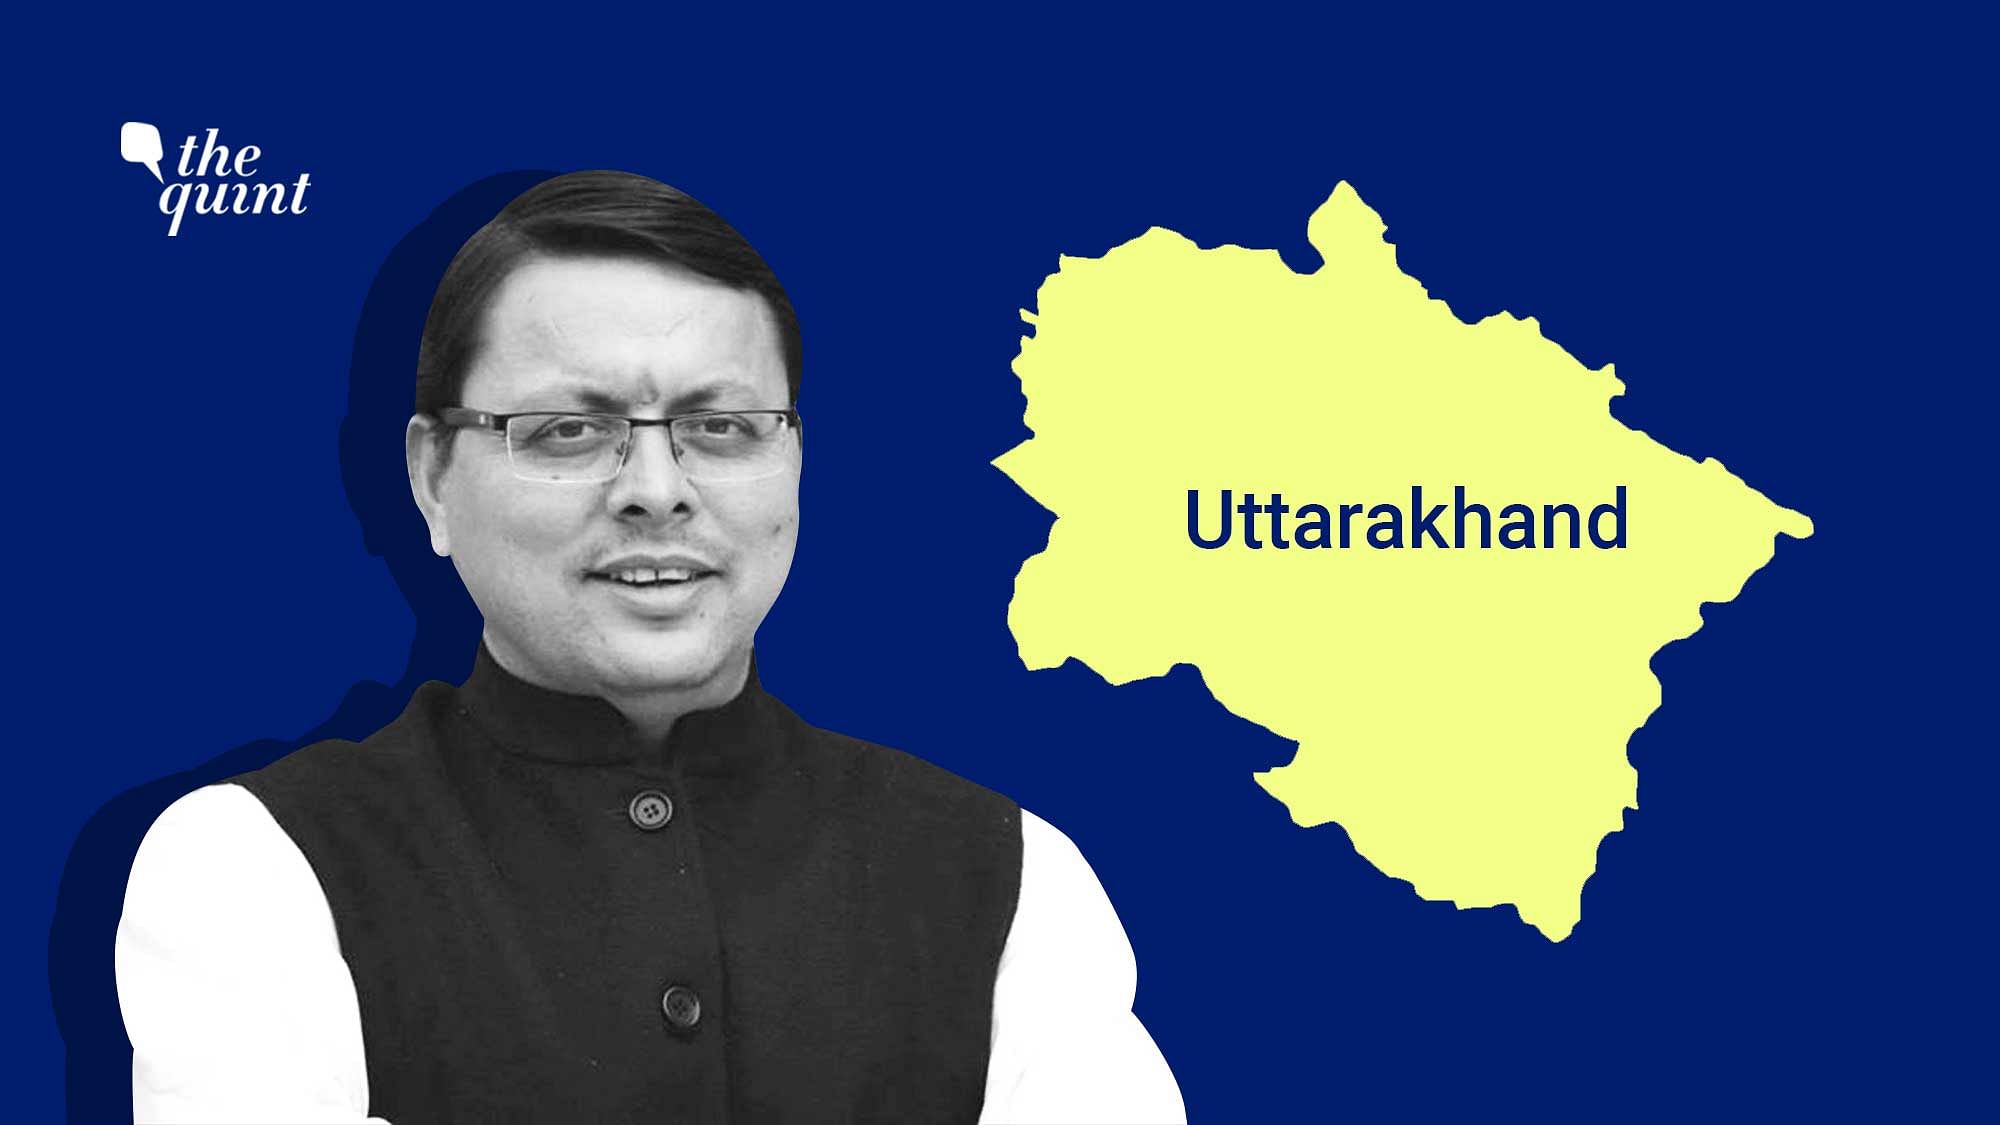 <div class="paragraphs"><p>Pushkar Singh Dhami will be taking over as the <a href="https://www.thequint.com/news/india/bjp-legislature-party-meet-new-uttarakhand-chief-minister">Chief Minister of Uttarakhand for a second consecutive term</a>, the Bharatiya Janata Party (BJP) announced on Monday, 21 March, following its legislature party meeting.</p></div>